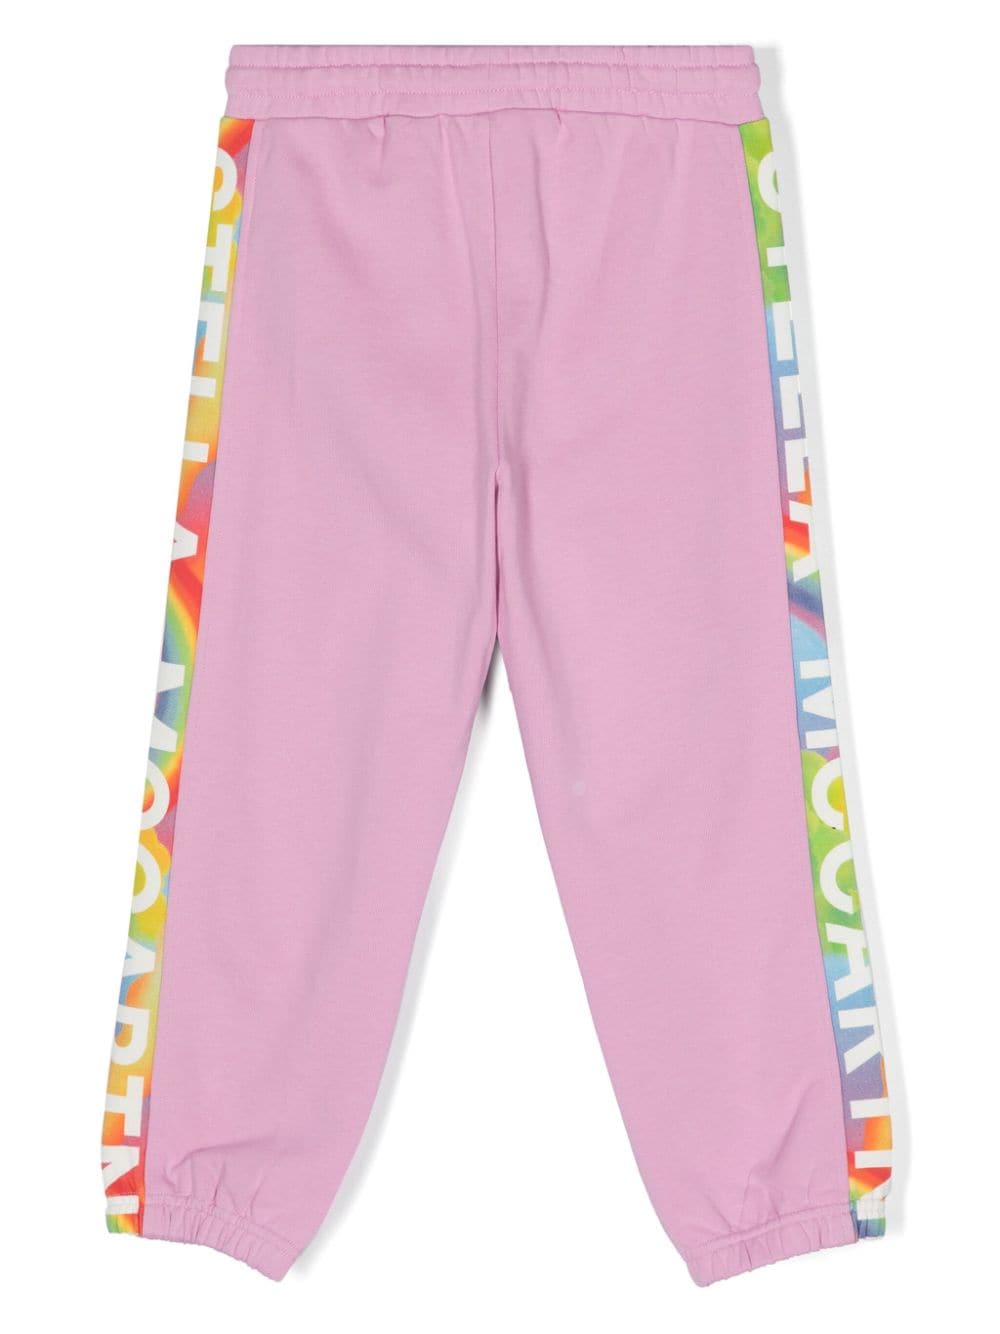 Bubblegum red sports trousers for girls